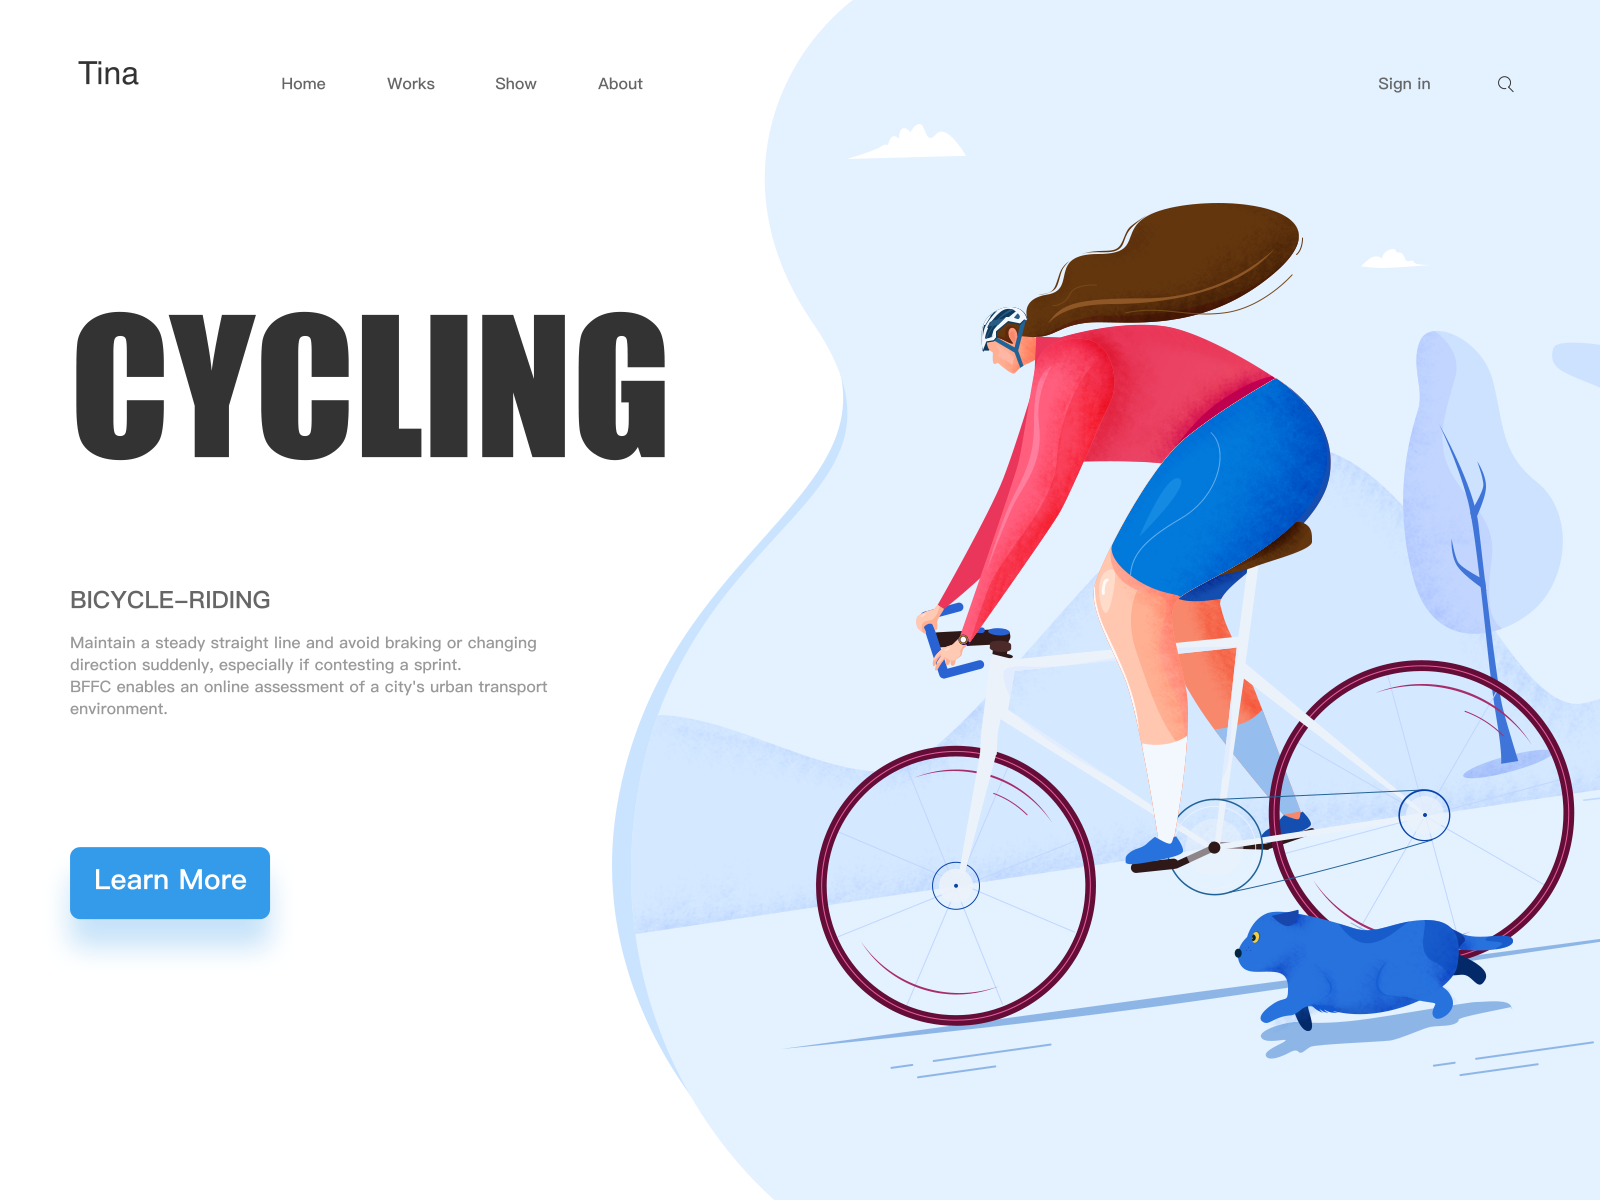 Cycling by Tina Lee for Top Pick Studio on Dribbble